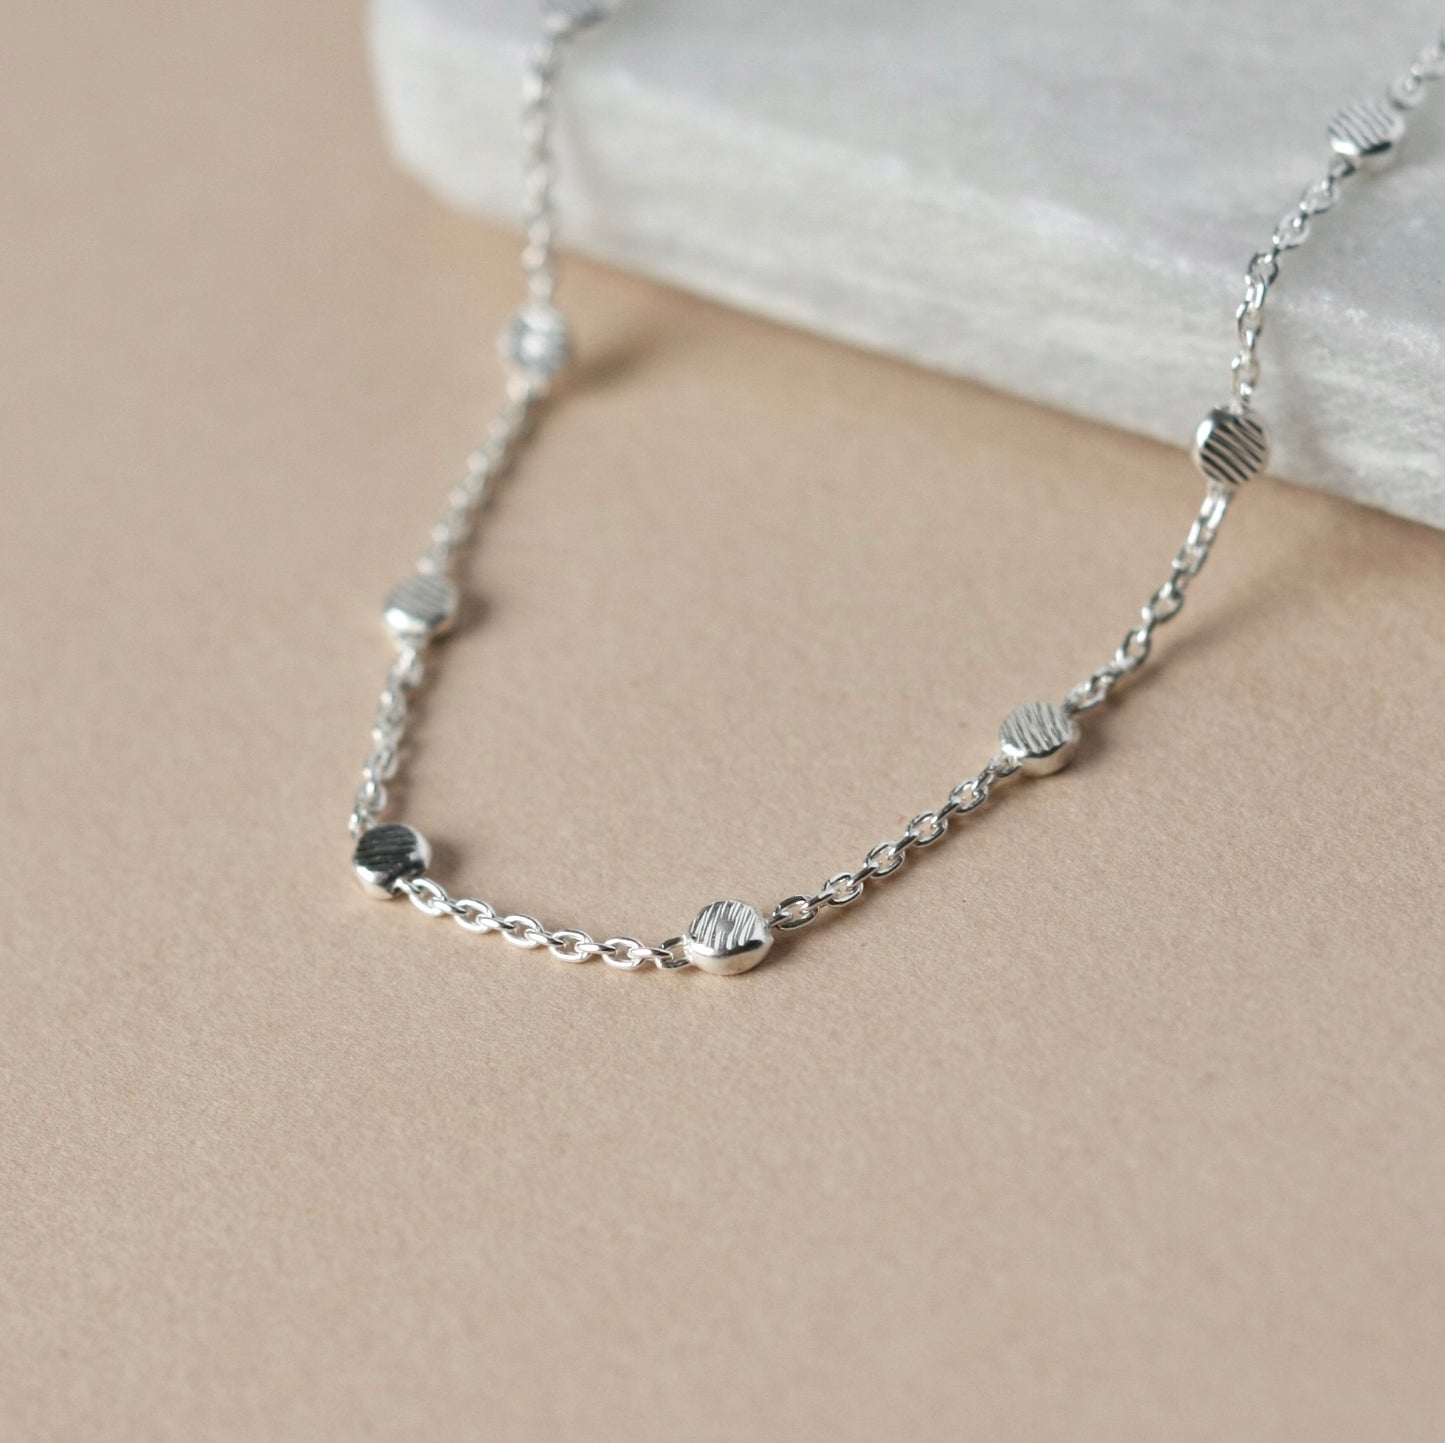 Dainty Silver Beaded Chain Necklace – julie garland jewelry